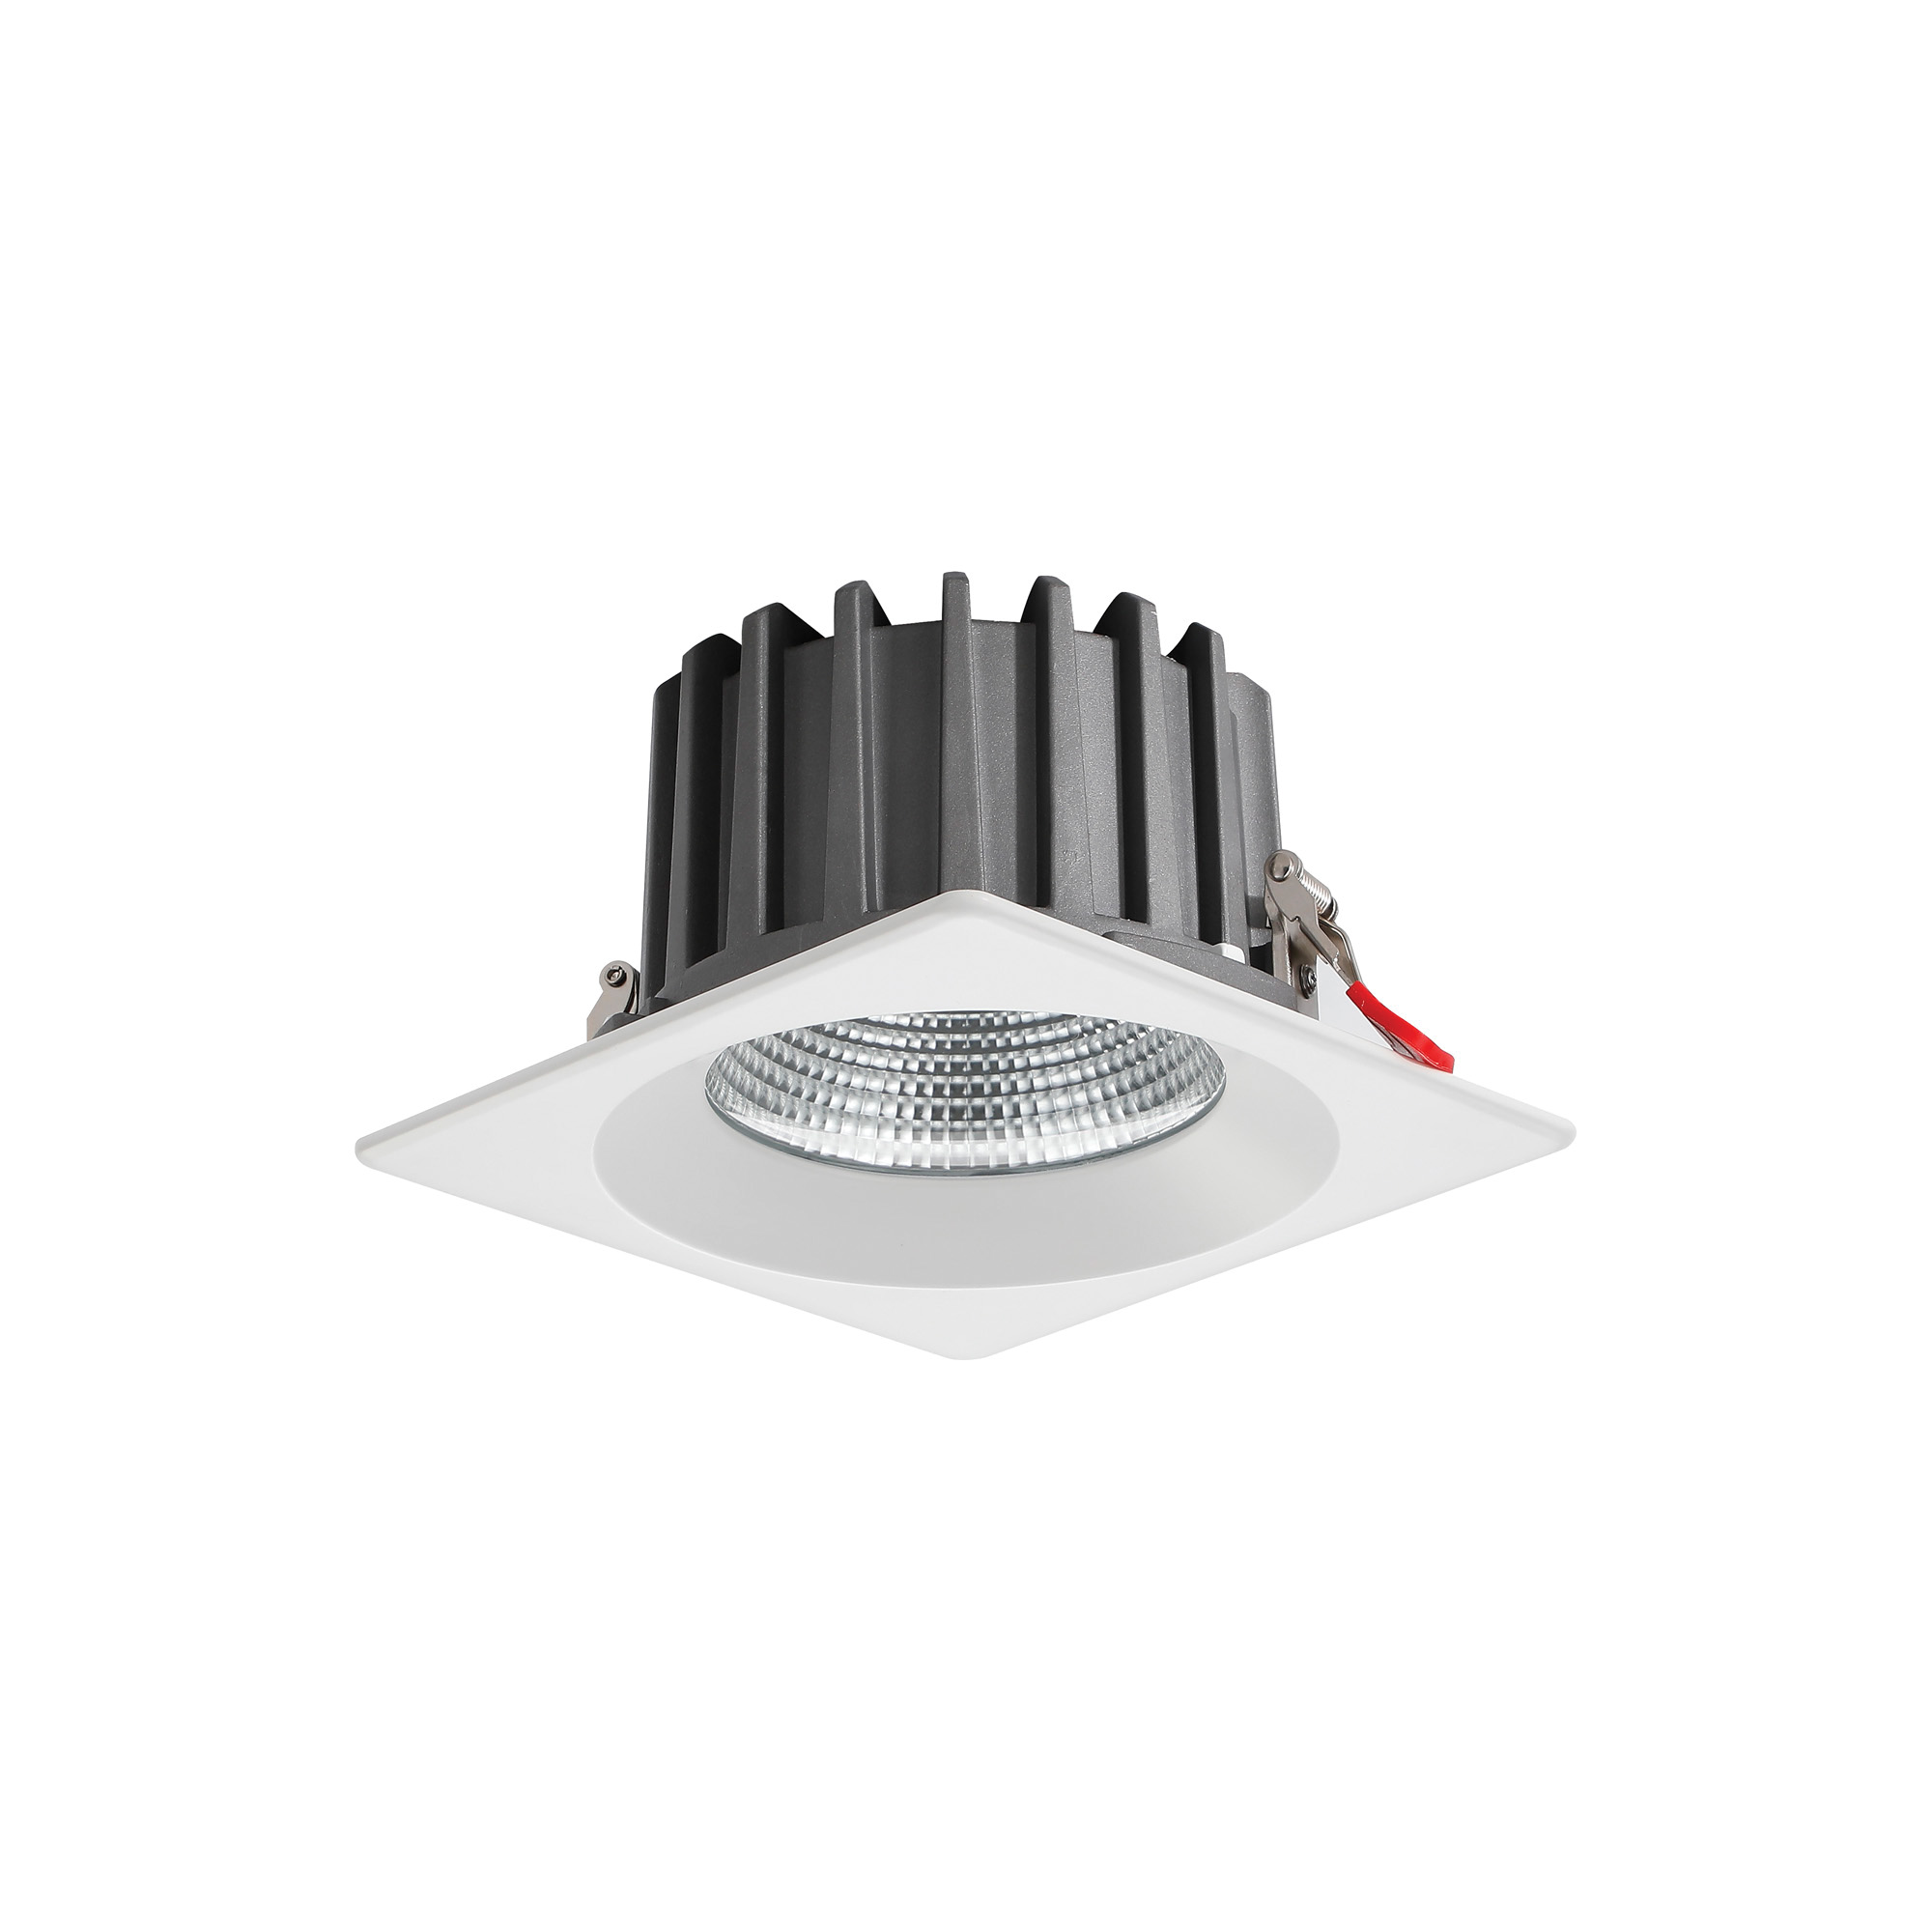 DL200074  Bionic 24, 24W, 700mA, White Deep Square Recessed Downlight, 1980lm ,Cut Out 155mm, 42° , 4000K, IP44, DRIVER INC., 5yrs Warranty.